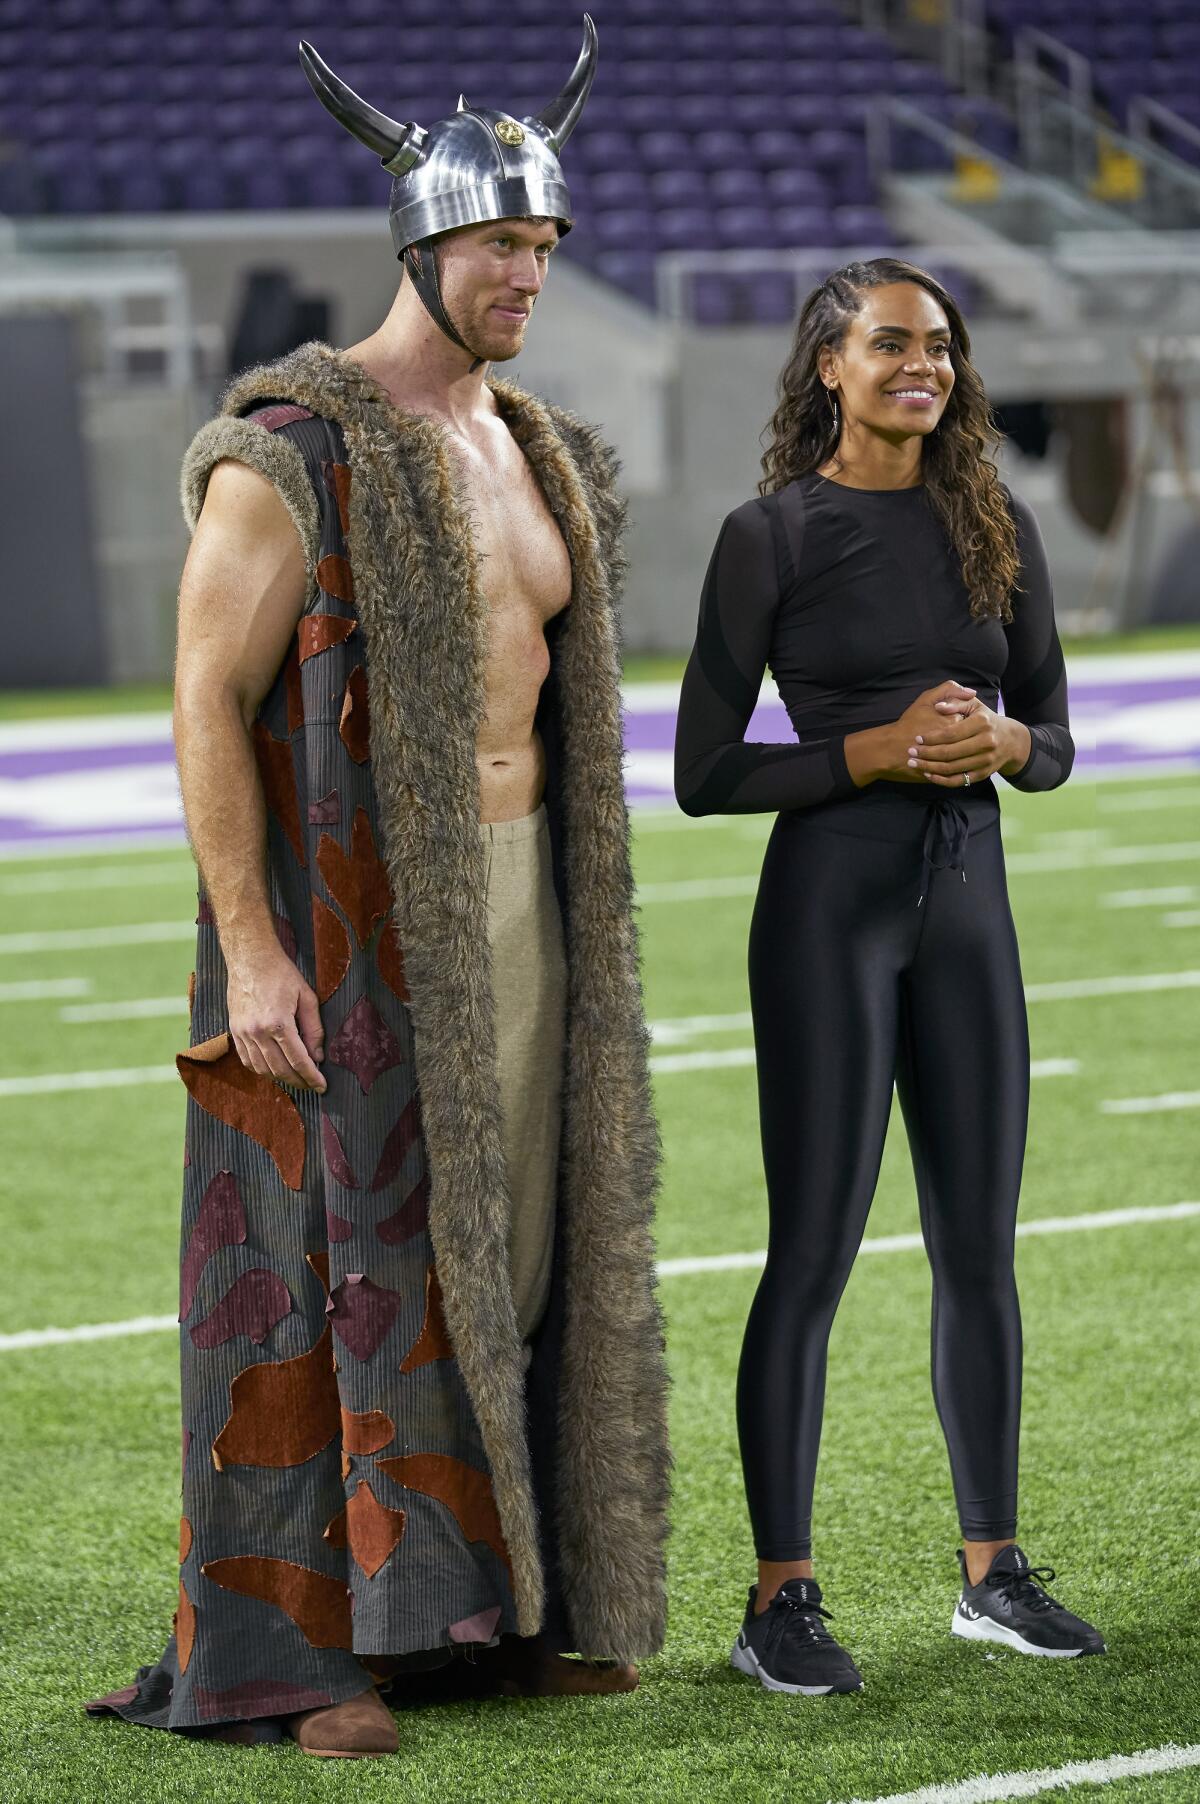 A man in a silly Viking costume standing next to a woman in spandex.